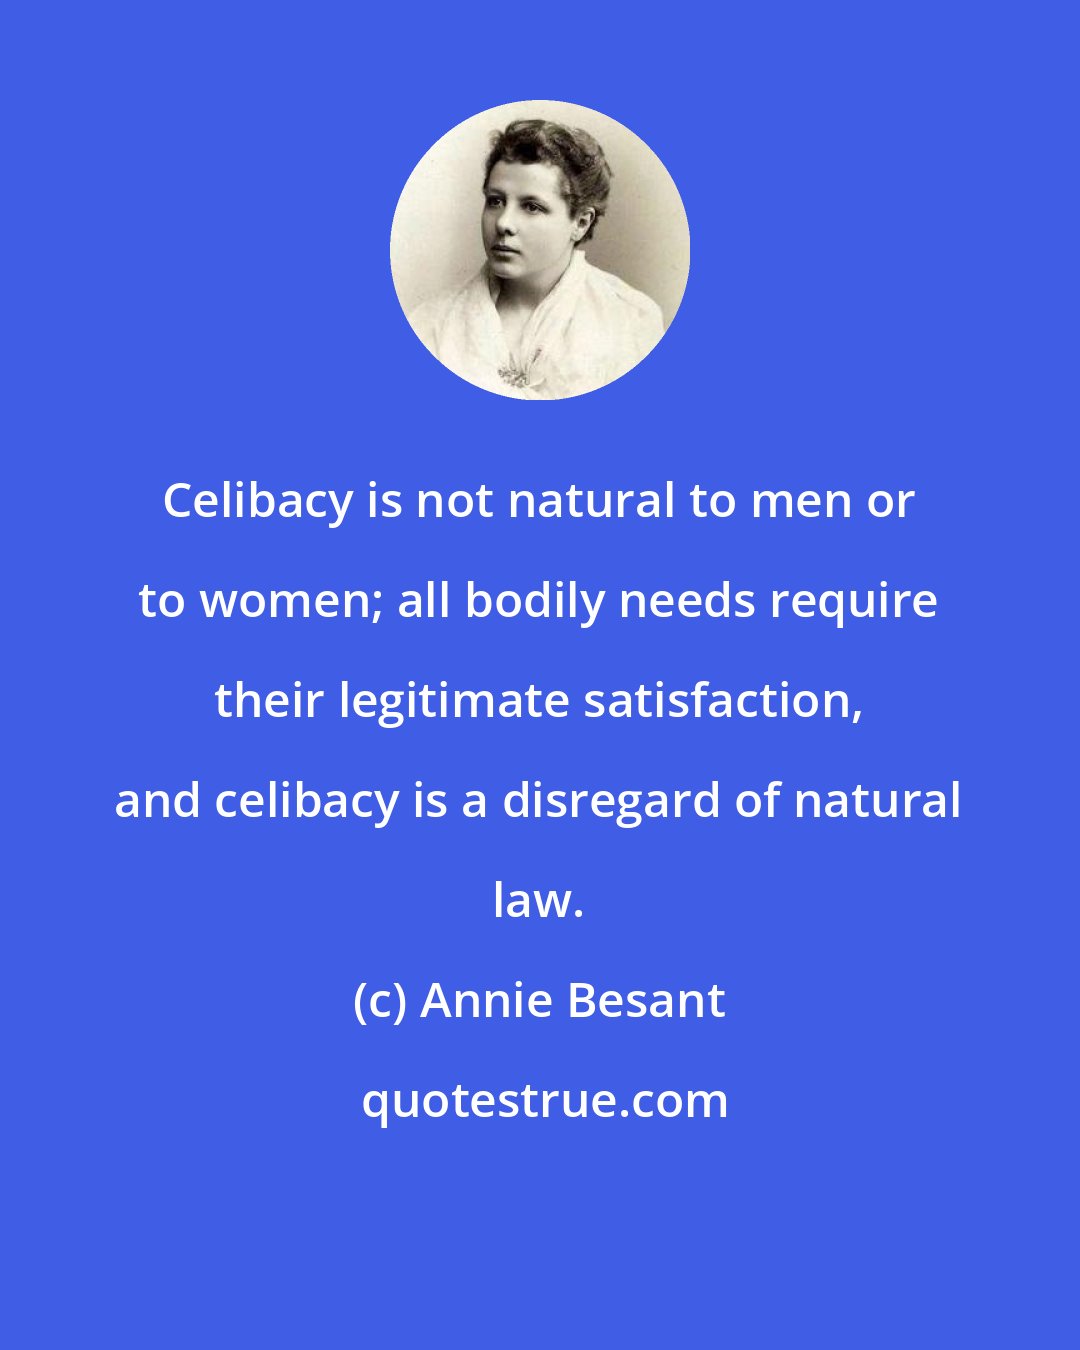 Annie Besant: Celibacy is not natural to men or to women; all bodily needs require their legitimate satisfaction, and celibacy is a disregard of natural law.